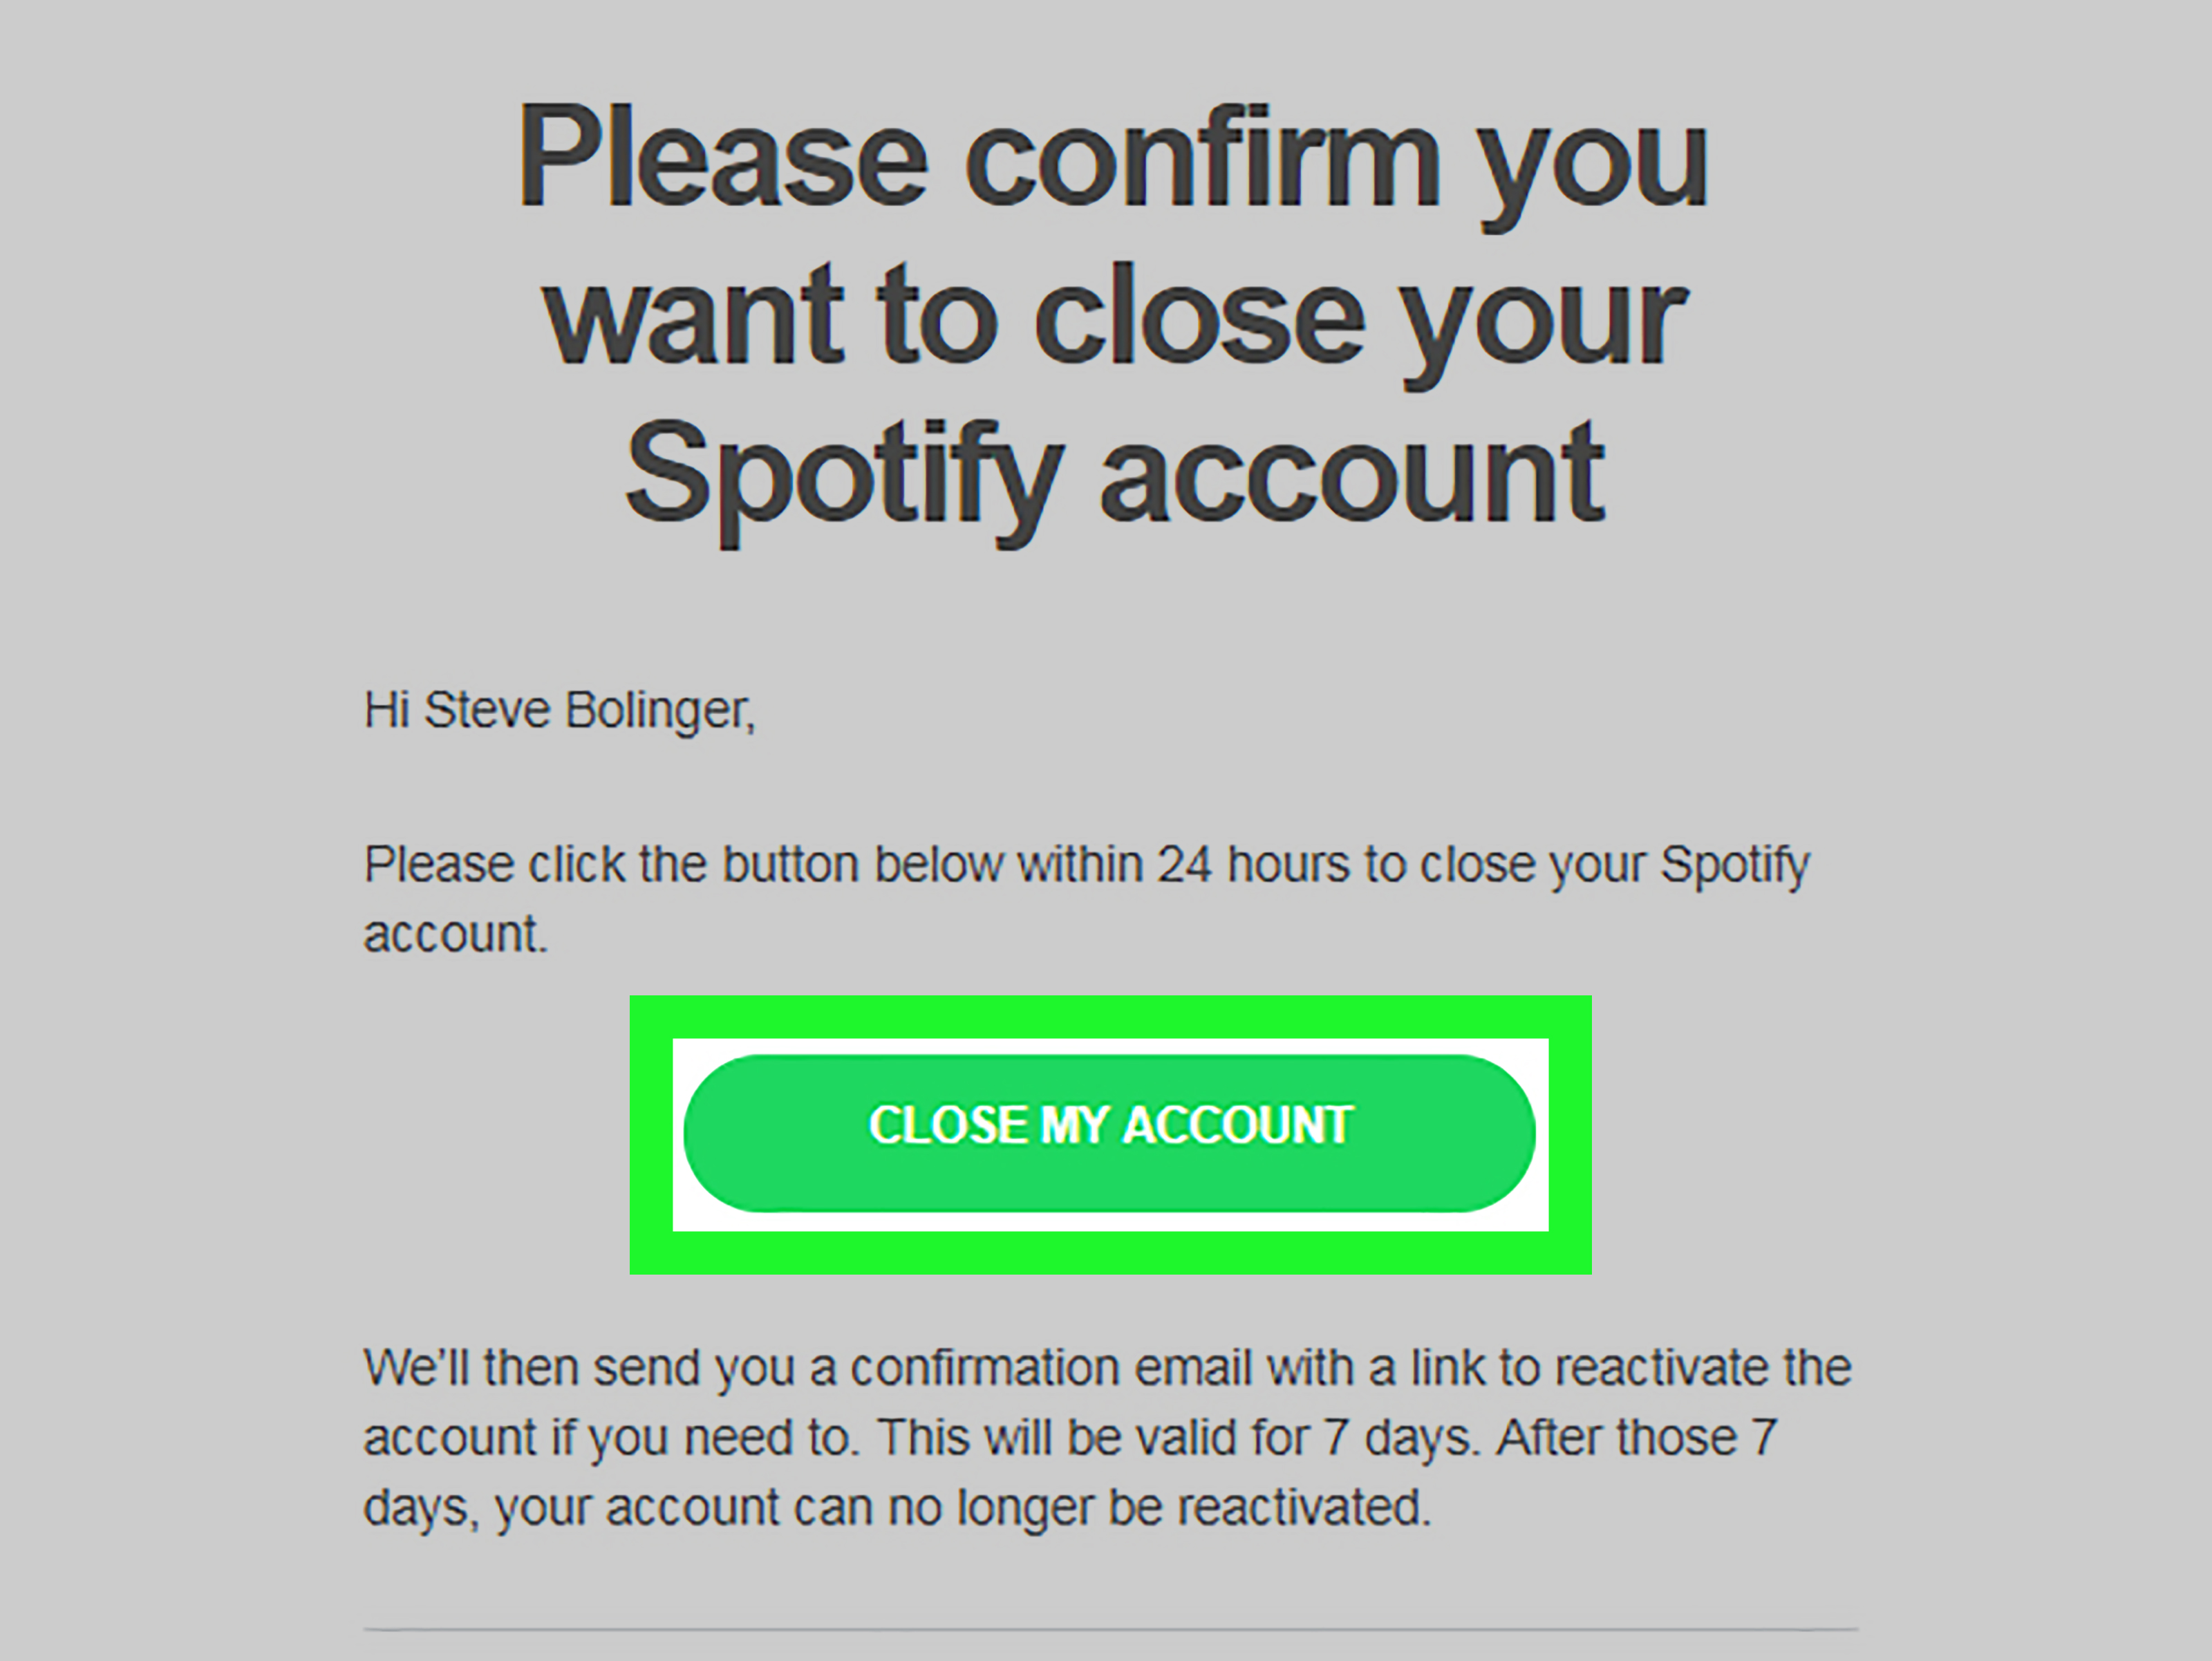 showtime spotify student login